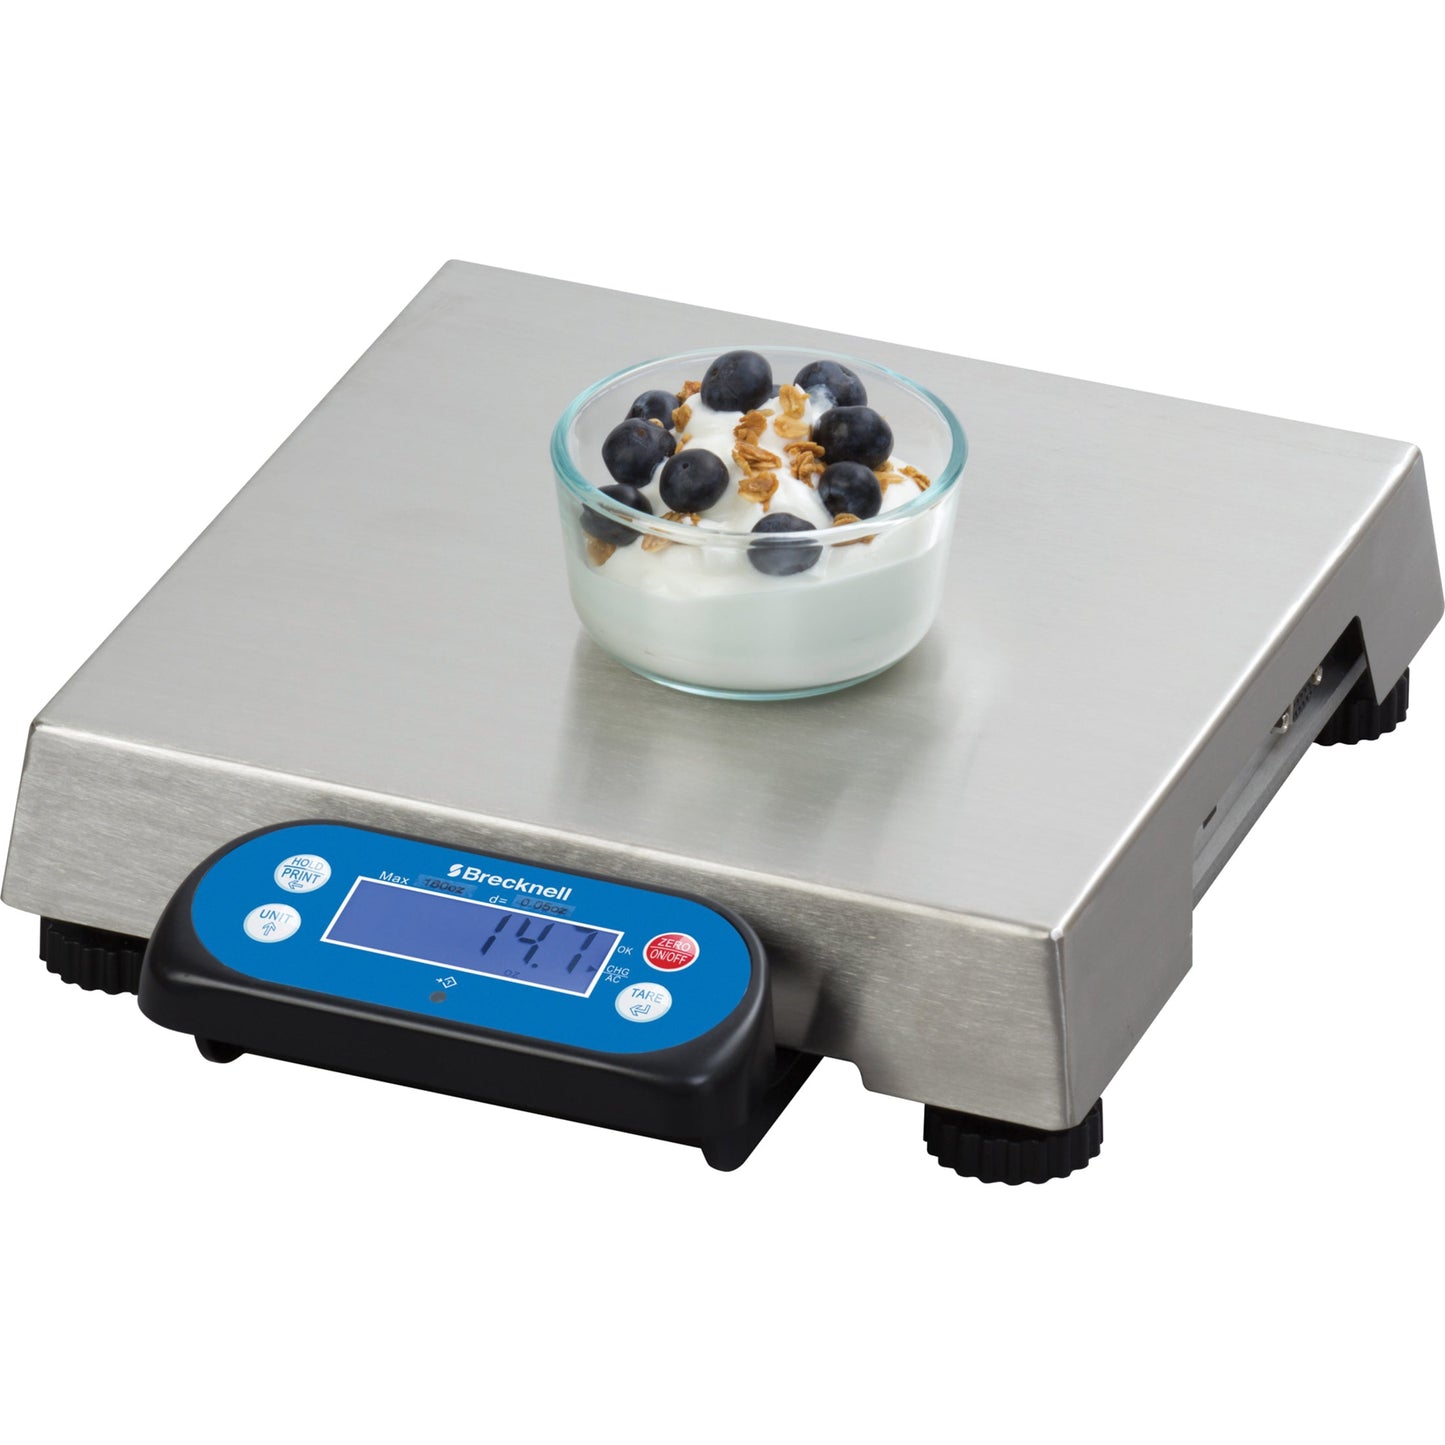 Brecknell 6710U POS Bench Scale 30lb. 10"x10" Platter Capacity Magnetic Mount Display USB & RS-232 Port